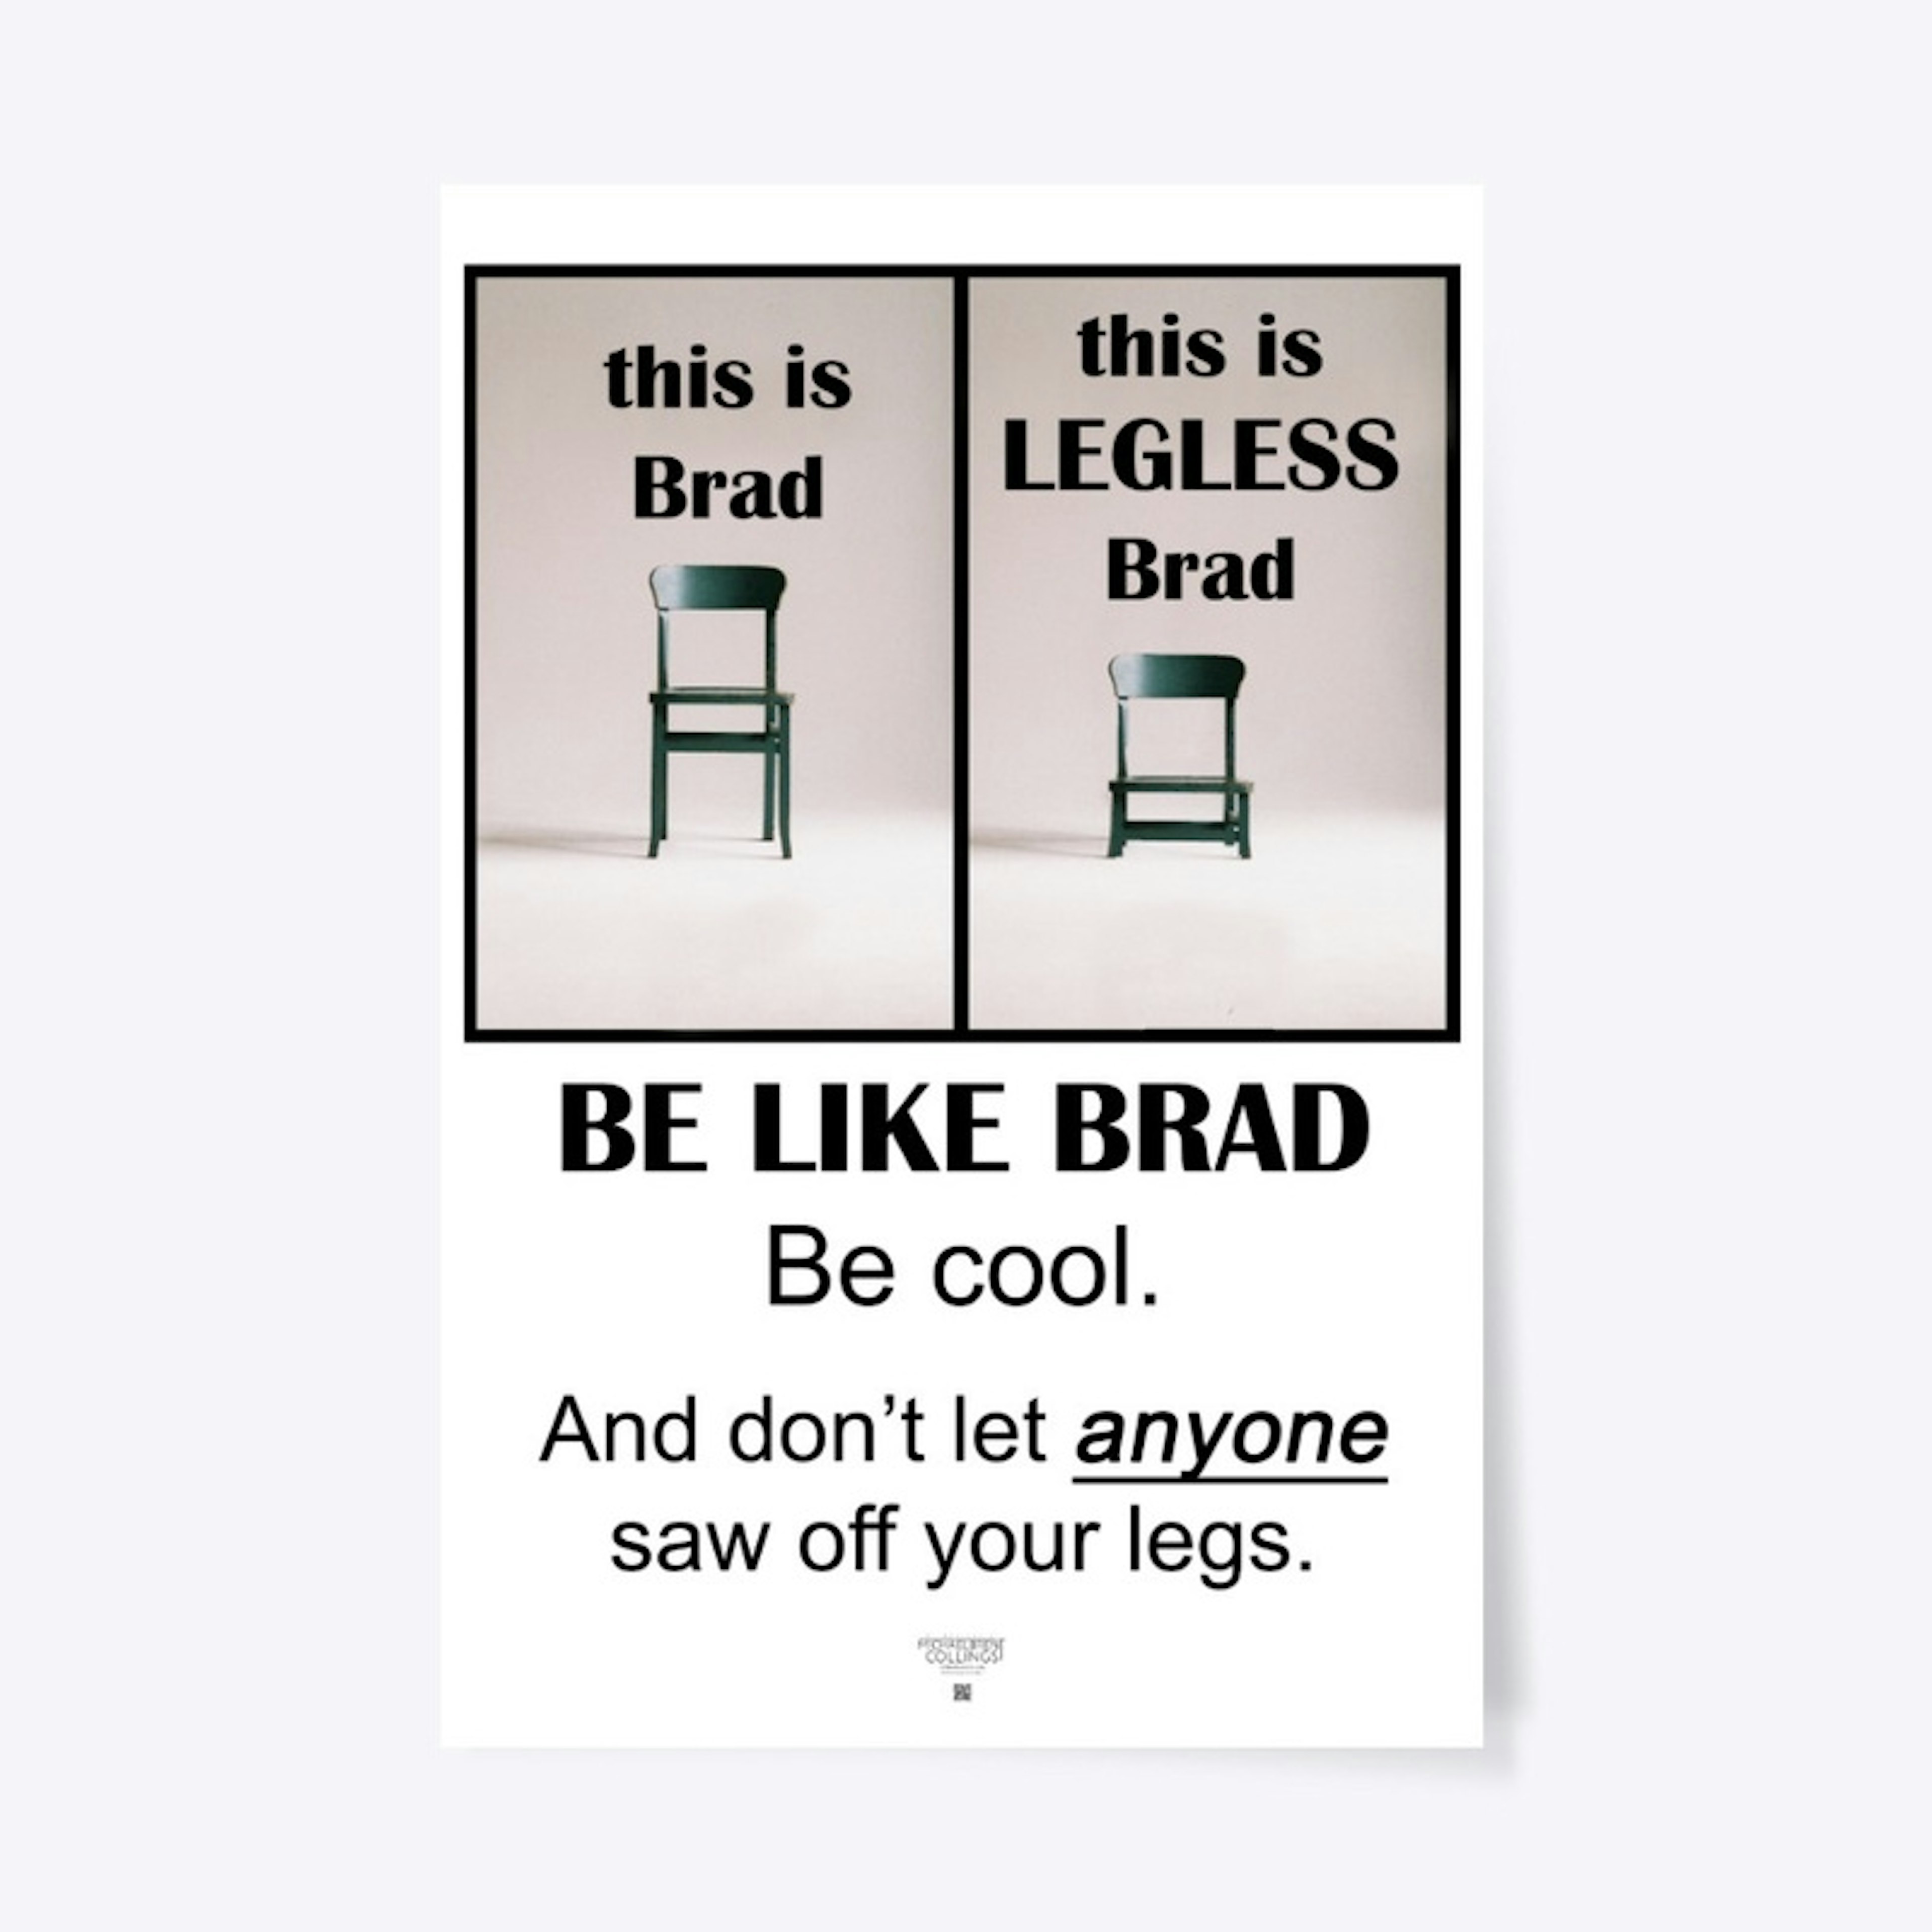 BE LIKE BRAD. Be cool. Have legs.